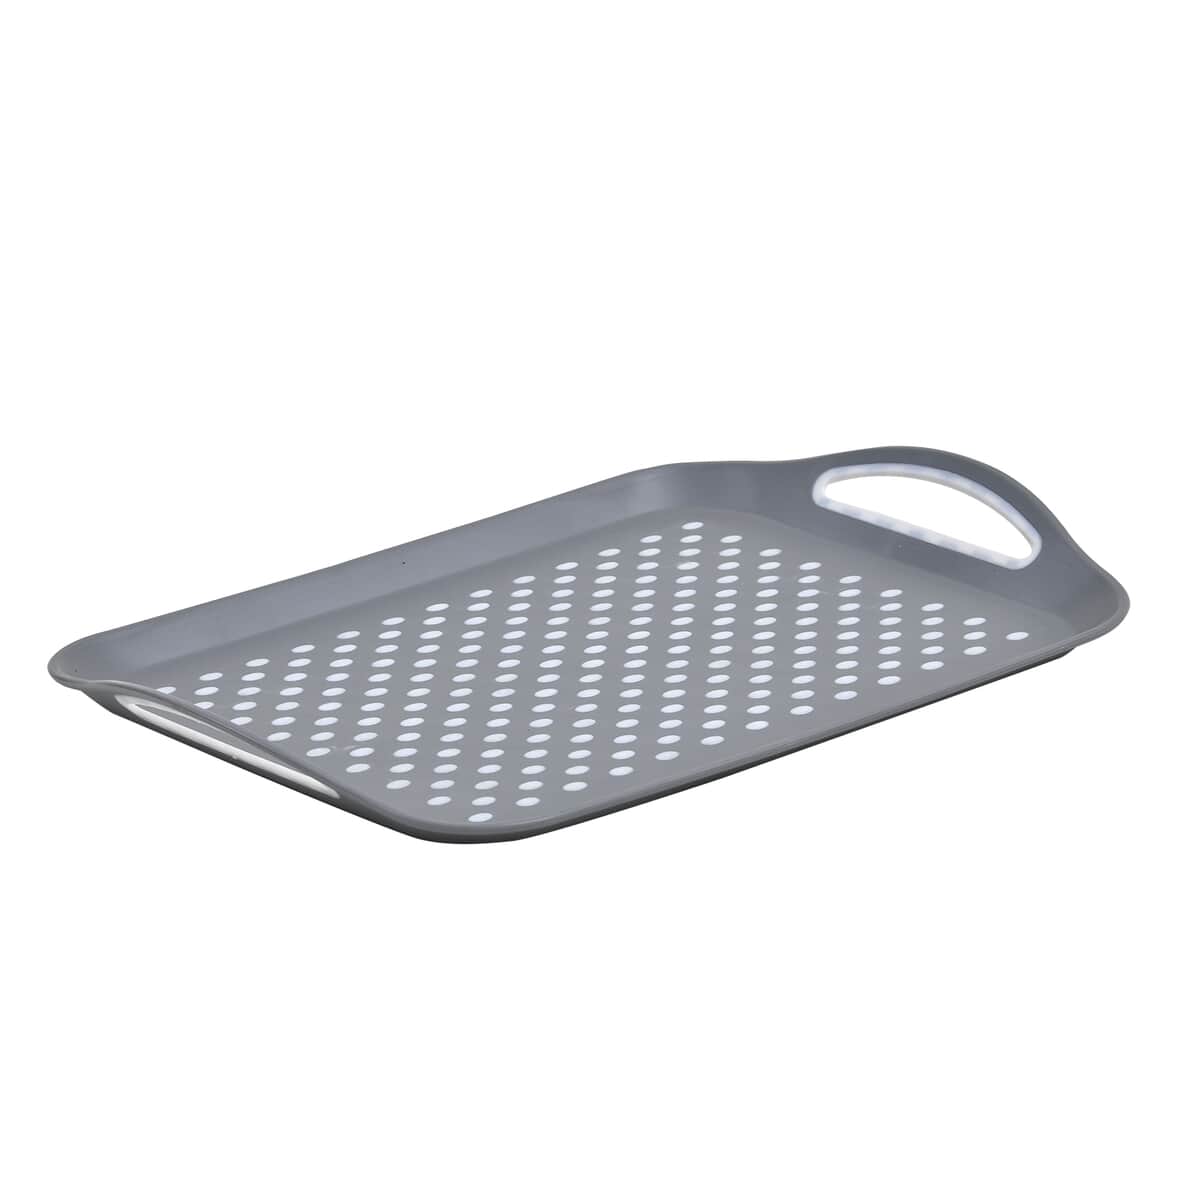 Black Rectangle Non Skid Rubber Grip Serving Tray (17.71"x12.6") image number 0